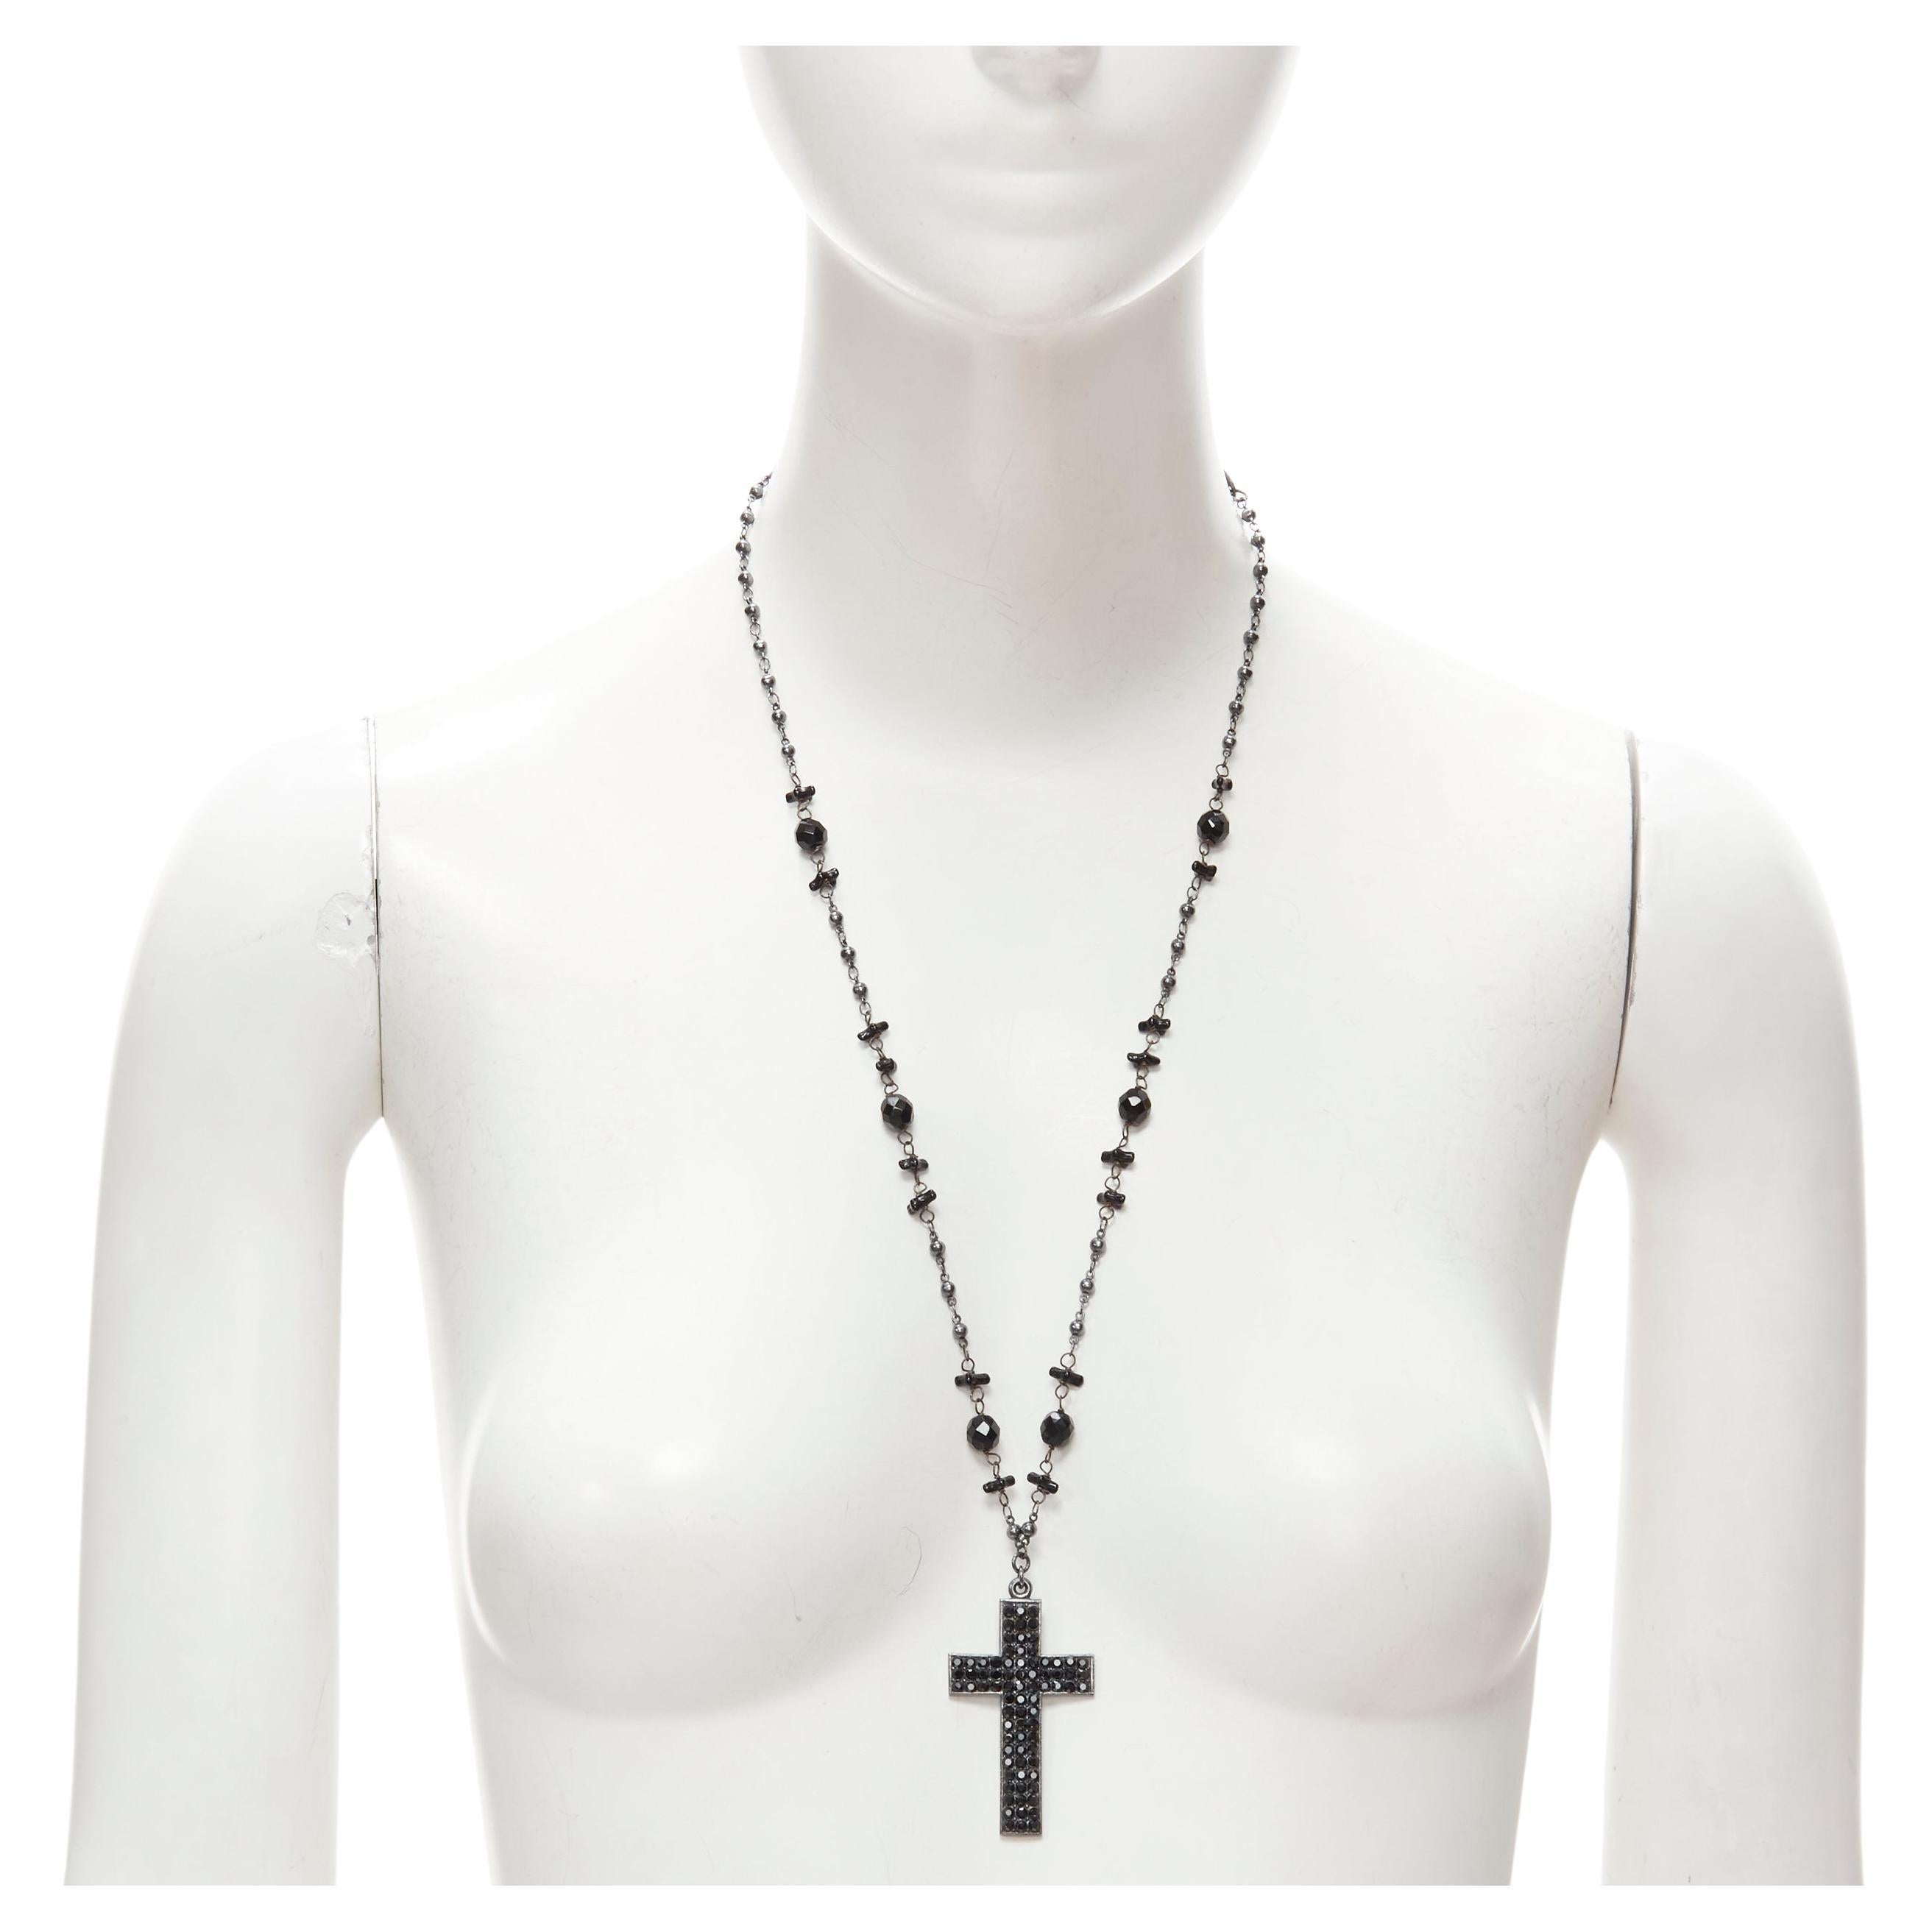 BABYLONE PARIS gunmetal crystal cross black beads rosary necklace For Sale